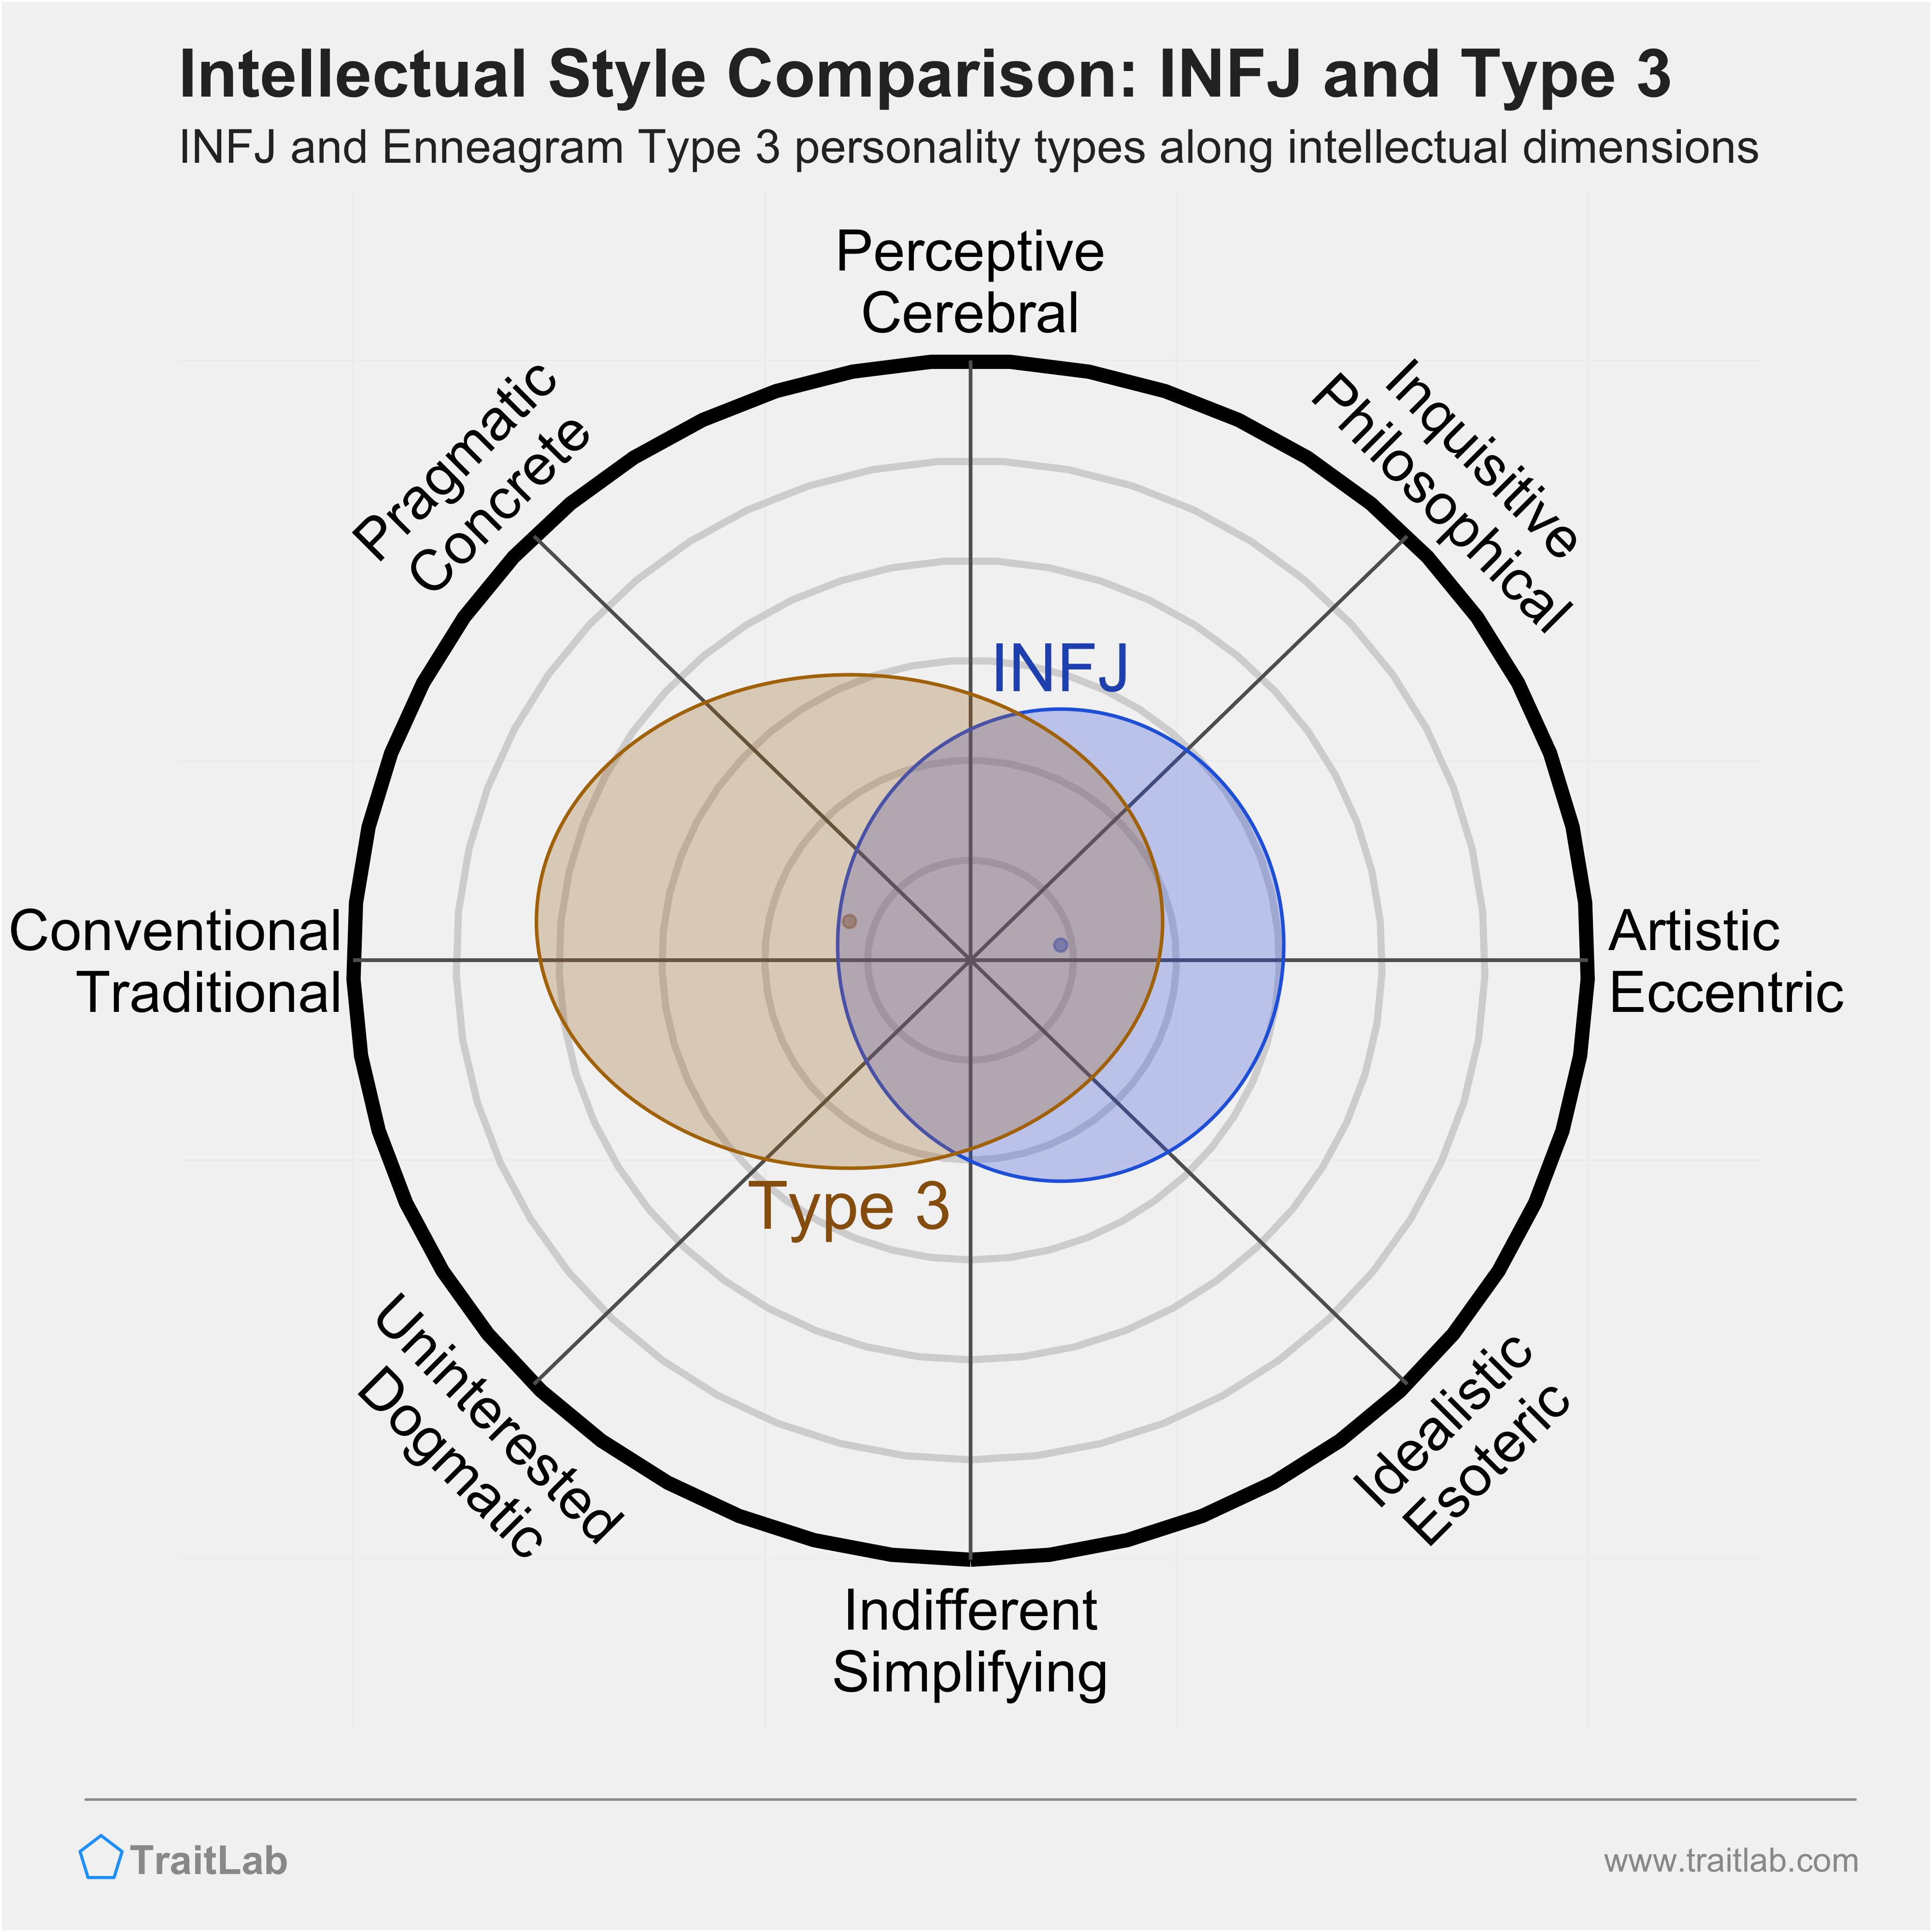 INFJ and Type 3 comparison across intellectual dimensions